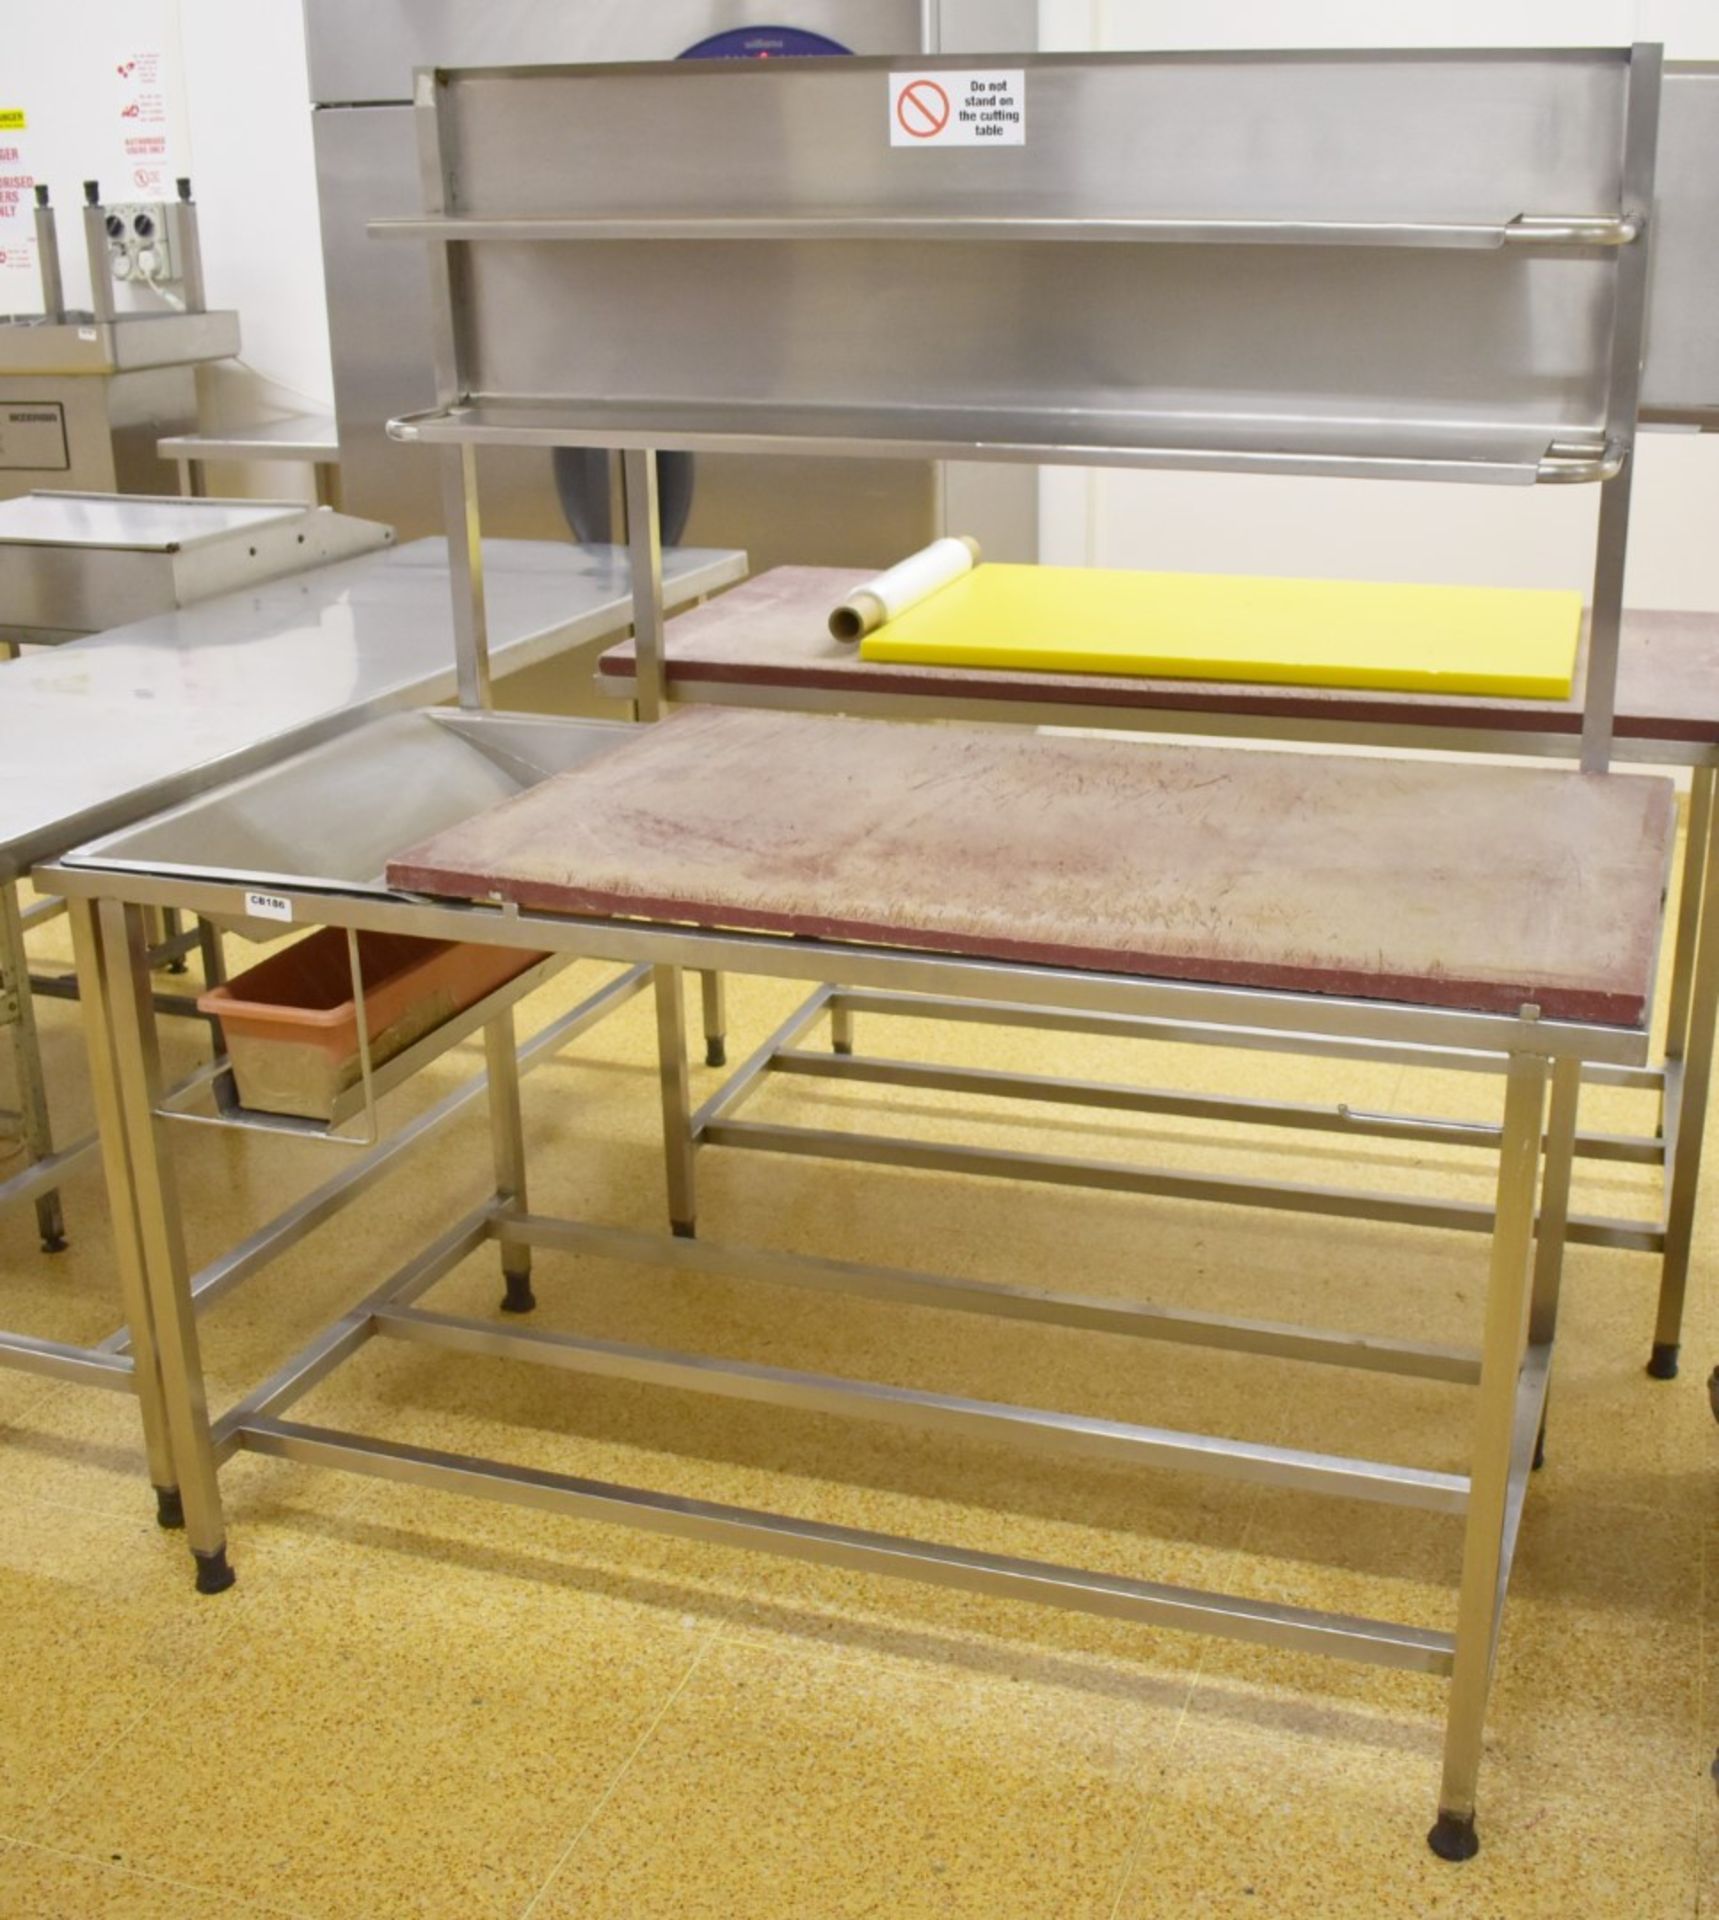 1 x Commercial Supermarket Butchers Prep Table - Stainless Steel Bench With Chopping Board, Drip